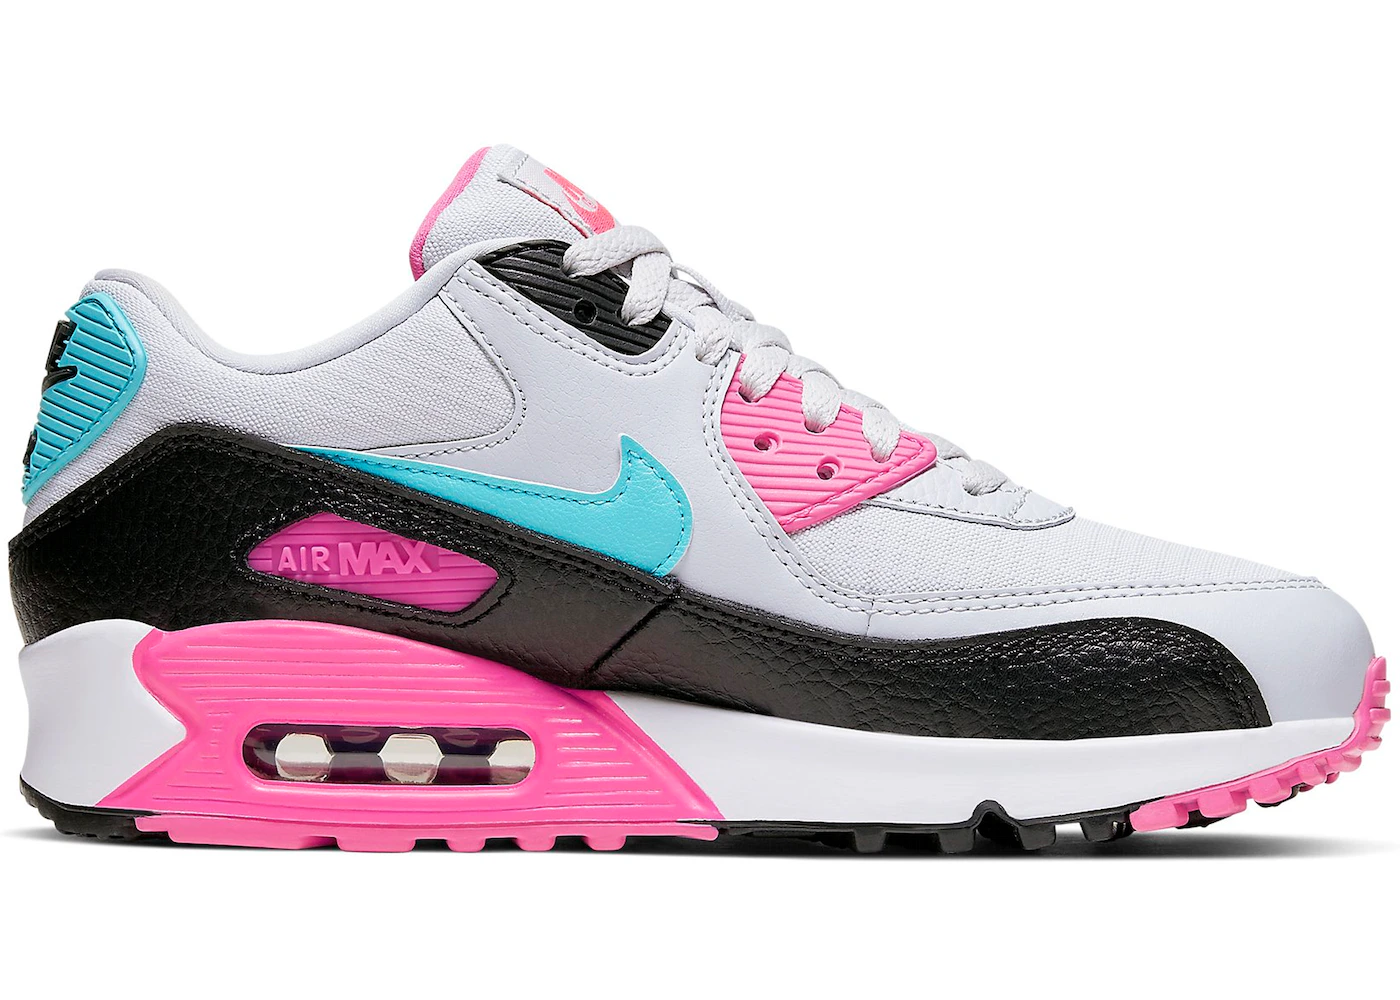 Nike Max 90 South Pink Teal (Women's) - 325213-065 - US